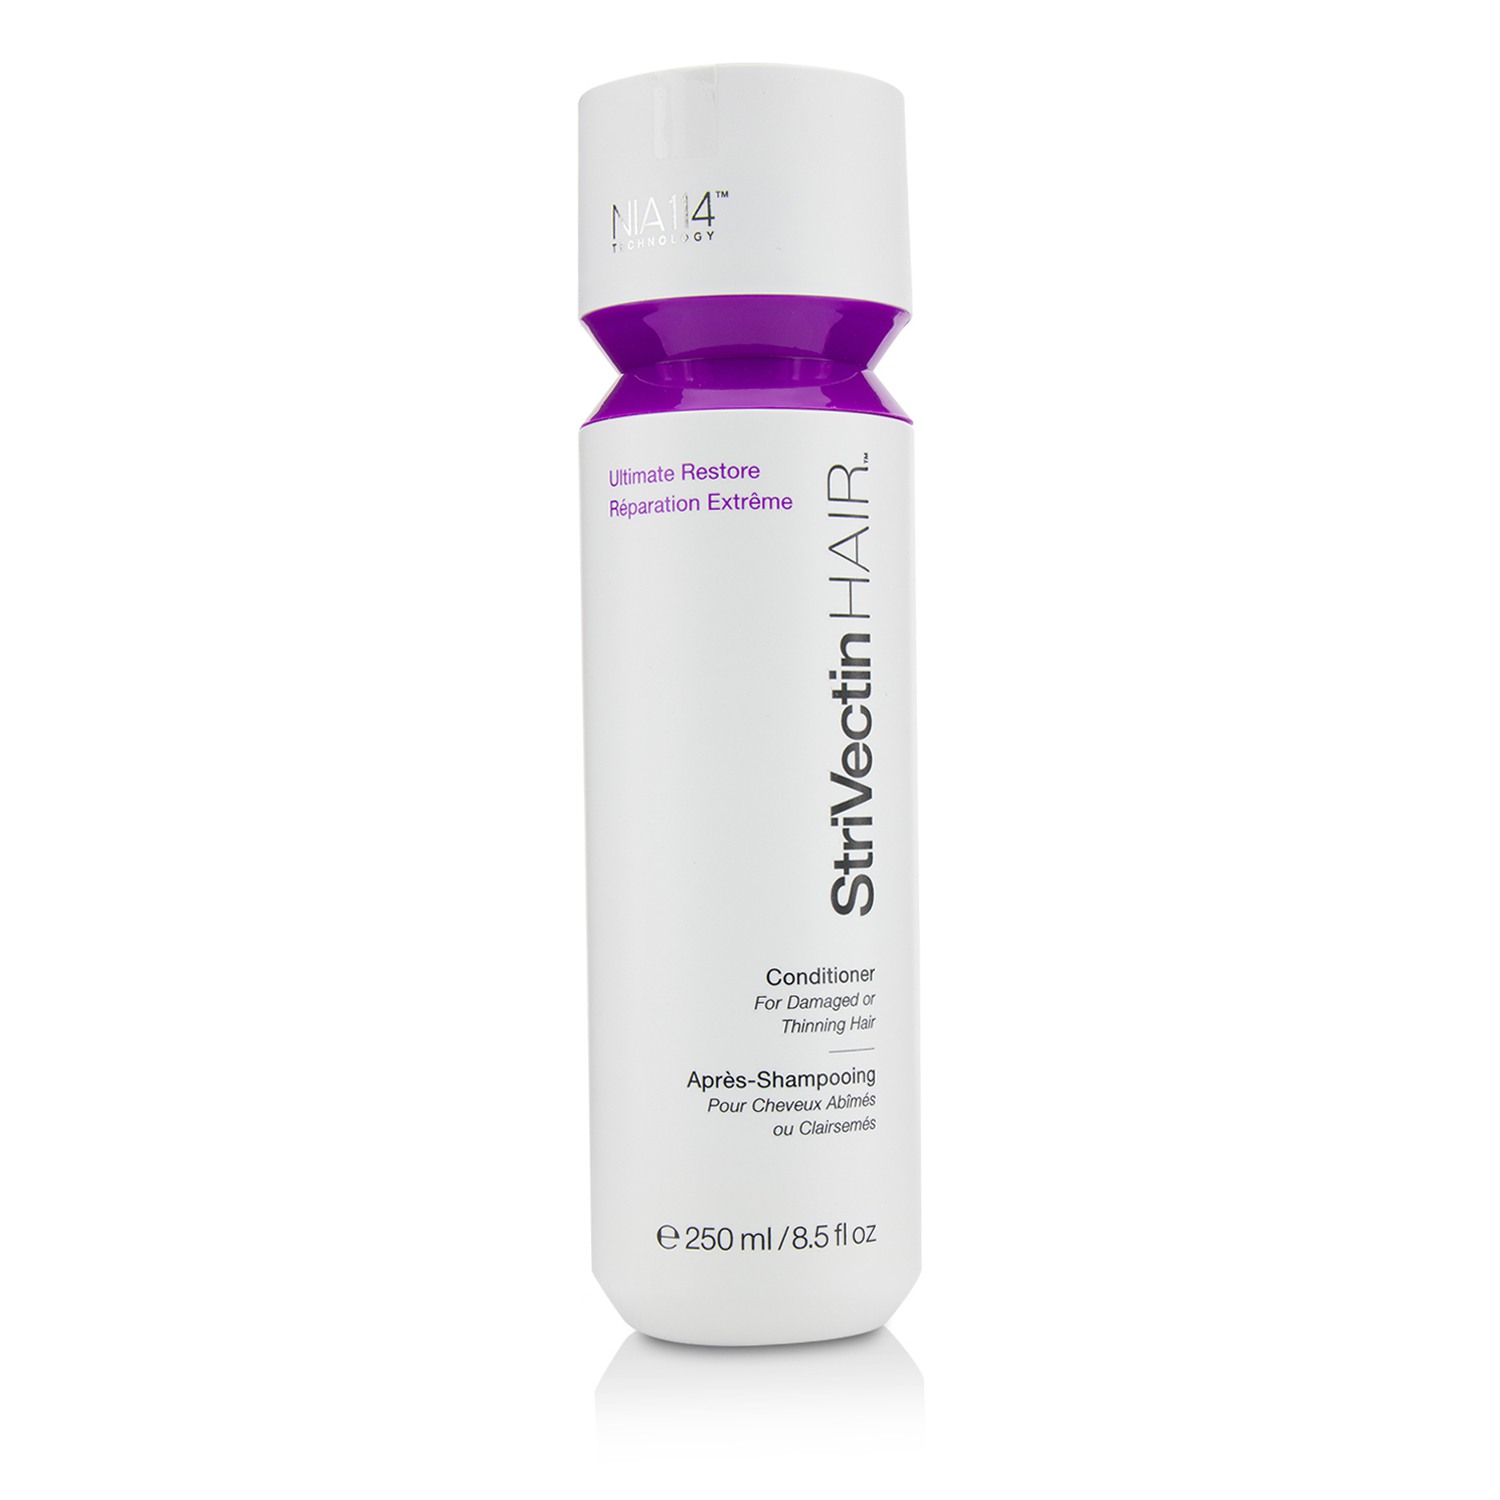 Ultimate Restore Conditioner (For Damaged or Thinning Hair) StriVectin Image